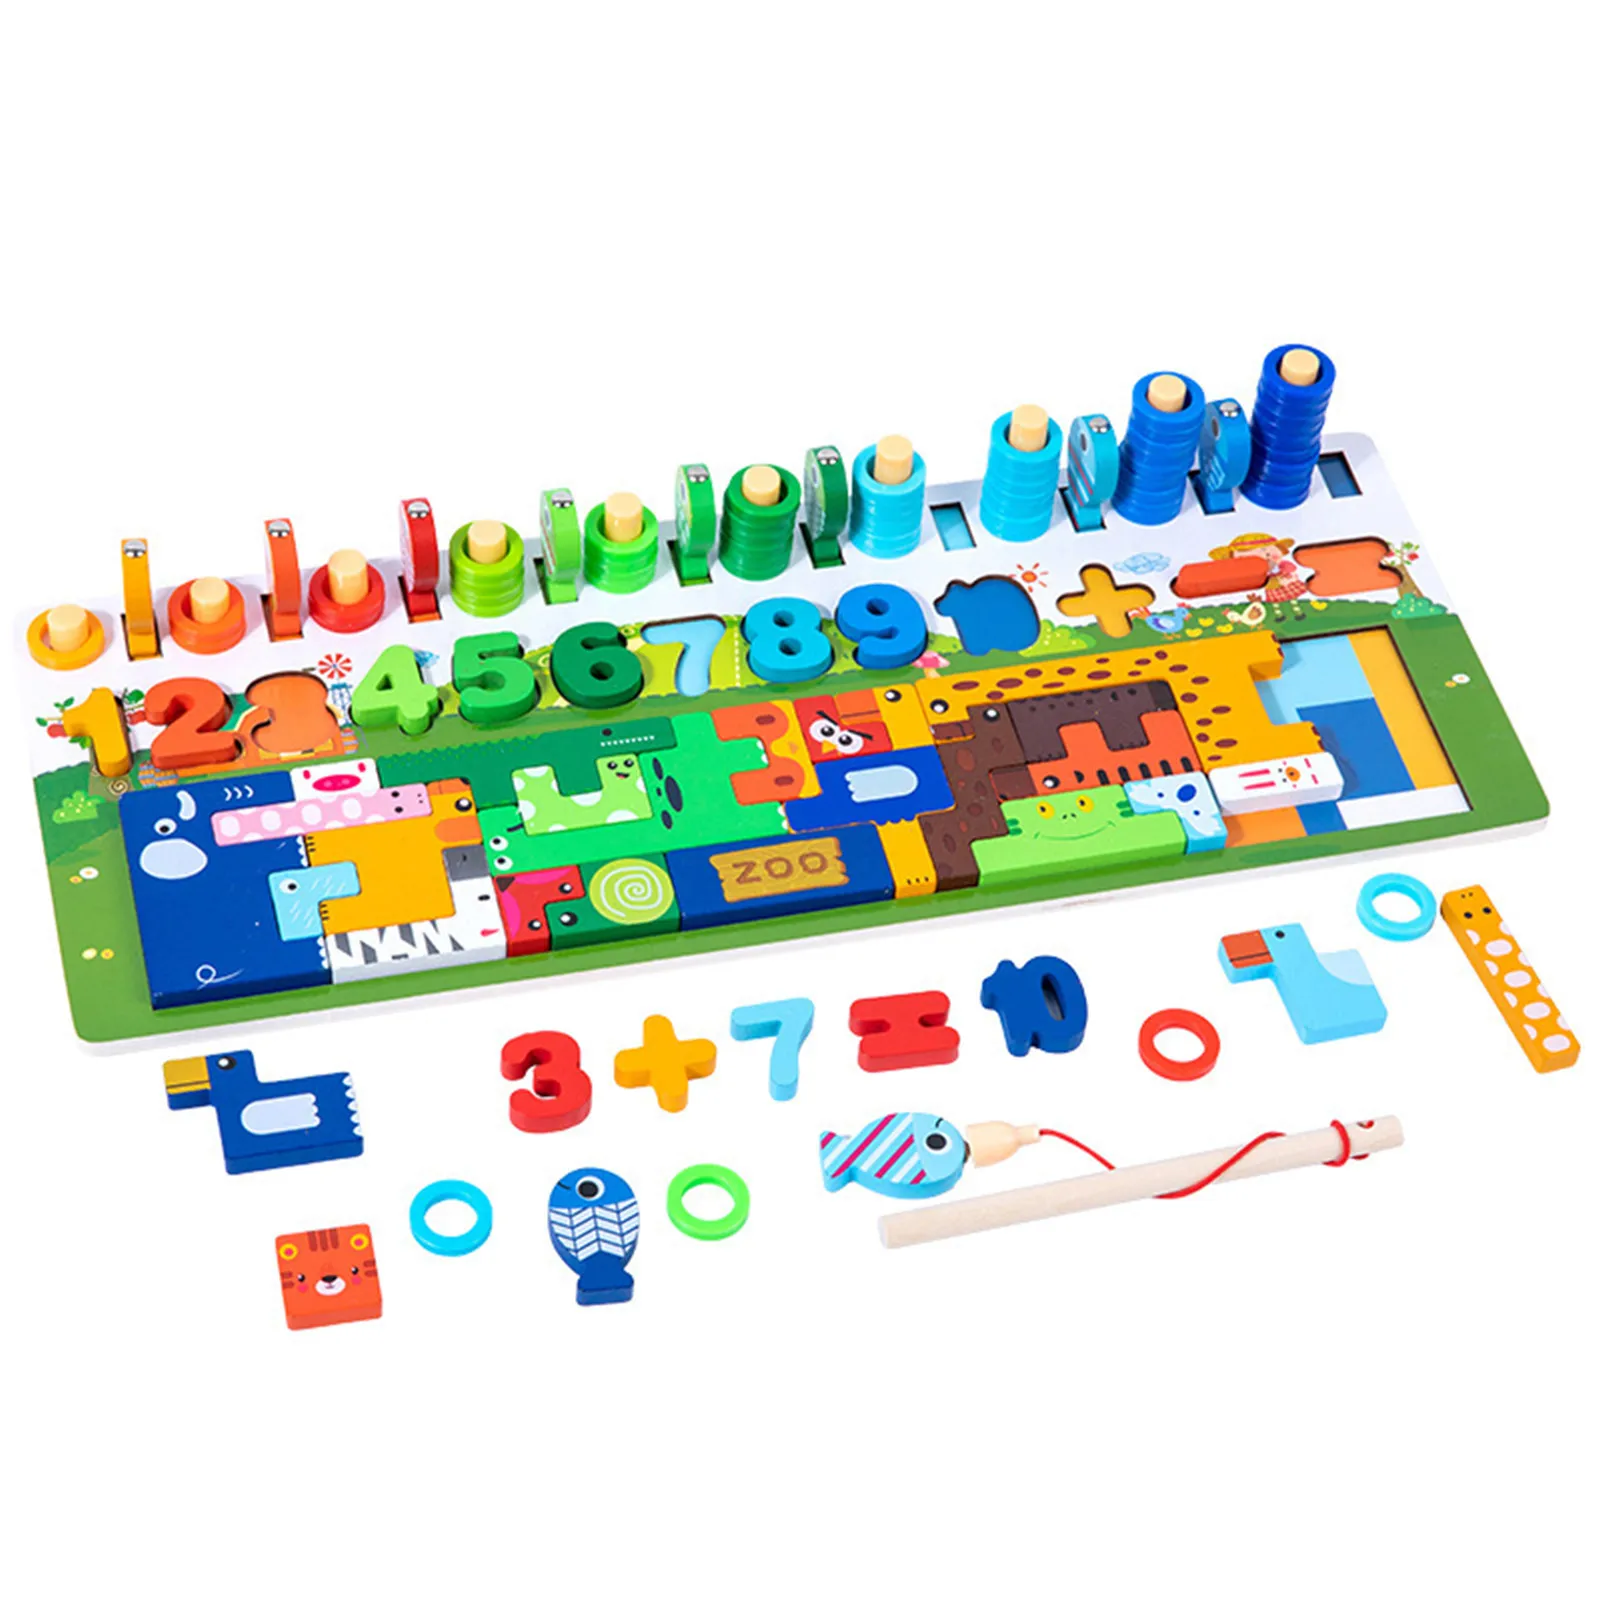 

Wooden Number Puzzle Sorting Montessori Toys For Toddlers Shape Sorter Counting Fishing Game Educational Math Stacking Block